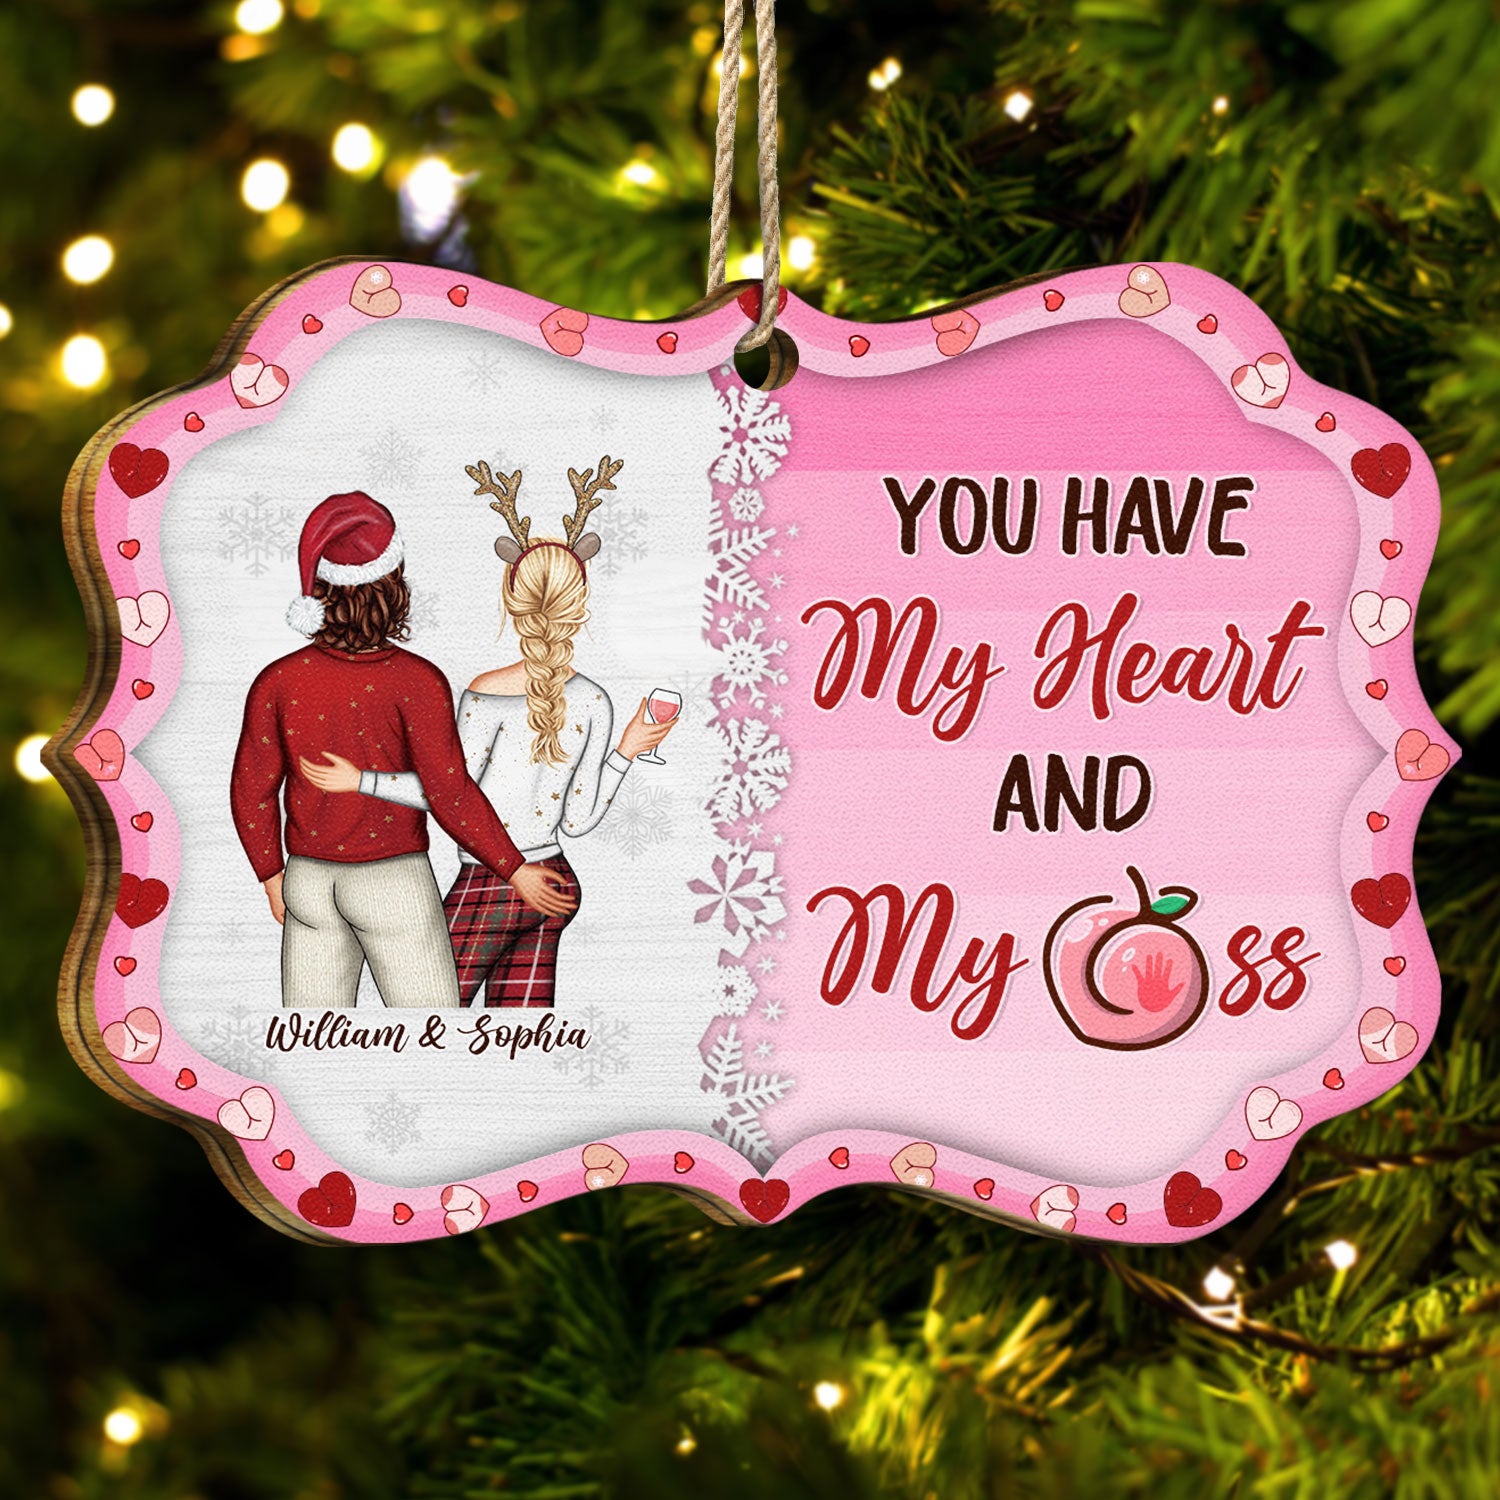 Couple You Have My Heart - Anniversary, Christmas Gift For Spouse, Lover, Husband, Wife, Boyfriend, Girlfriend, Couples - Personalized Medallion Wooden Ornament